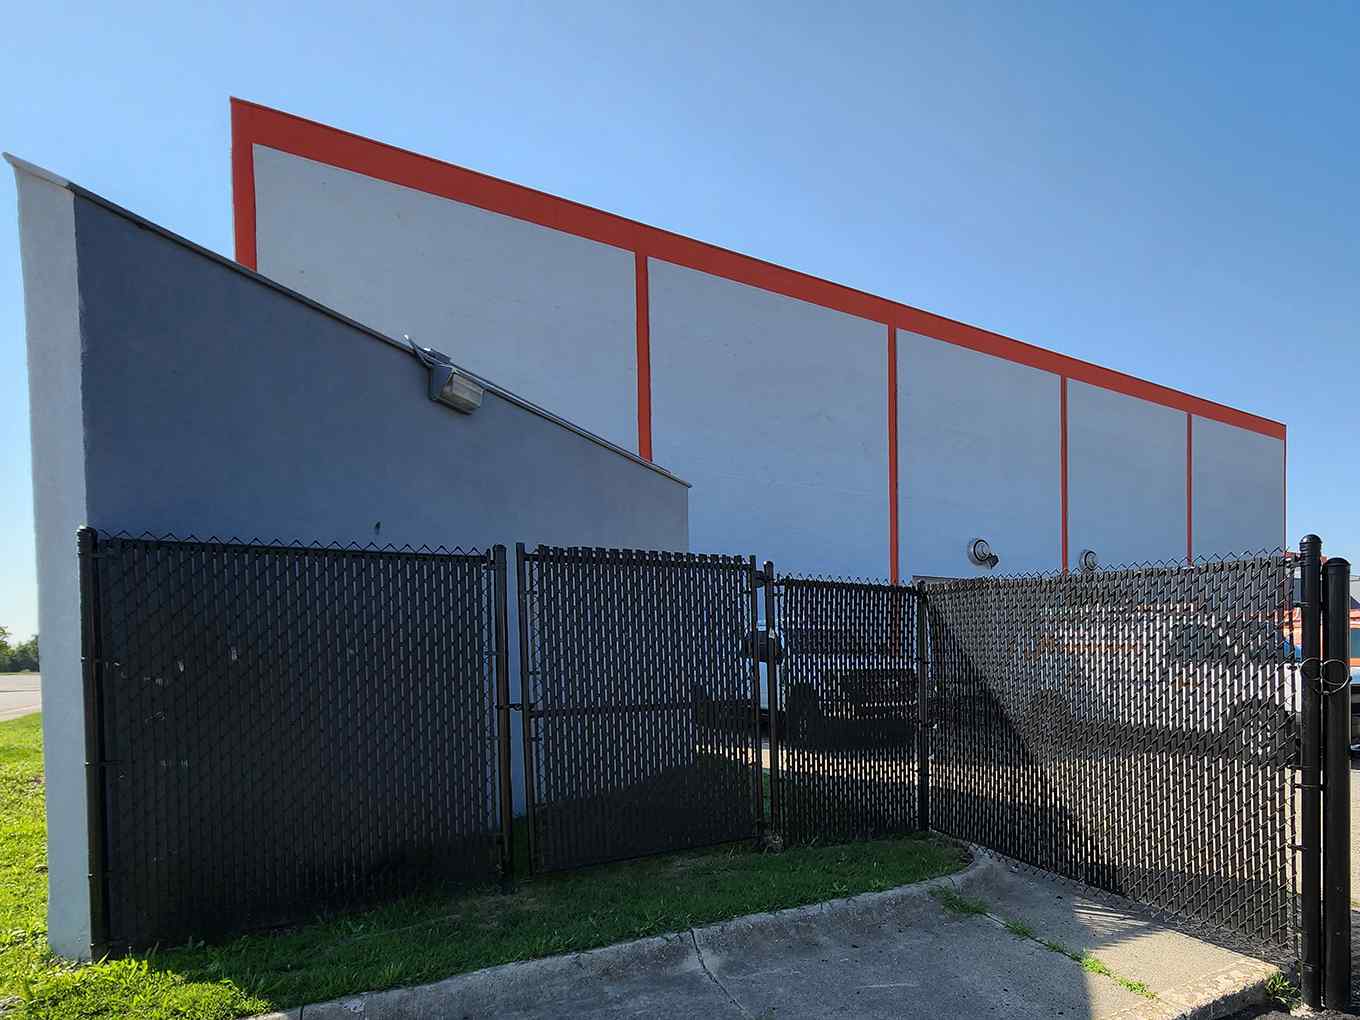 Commercial Indianapolis, Indiana chain link fences